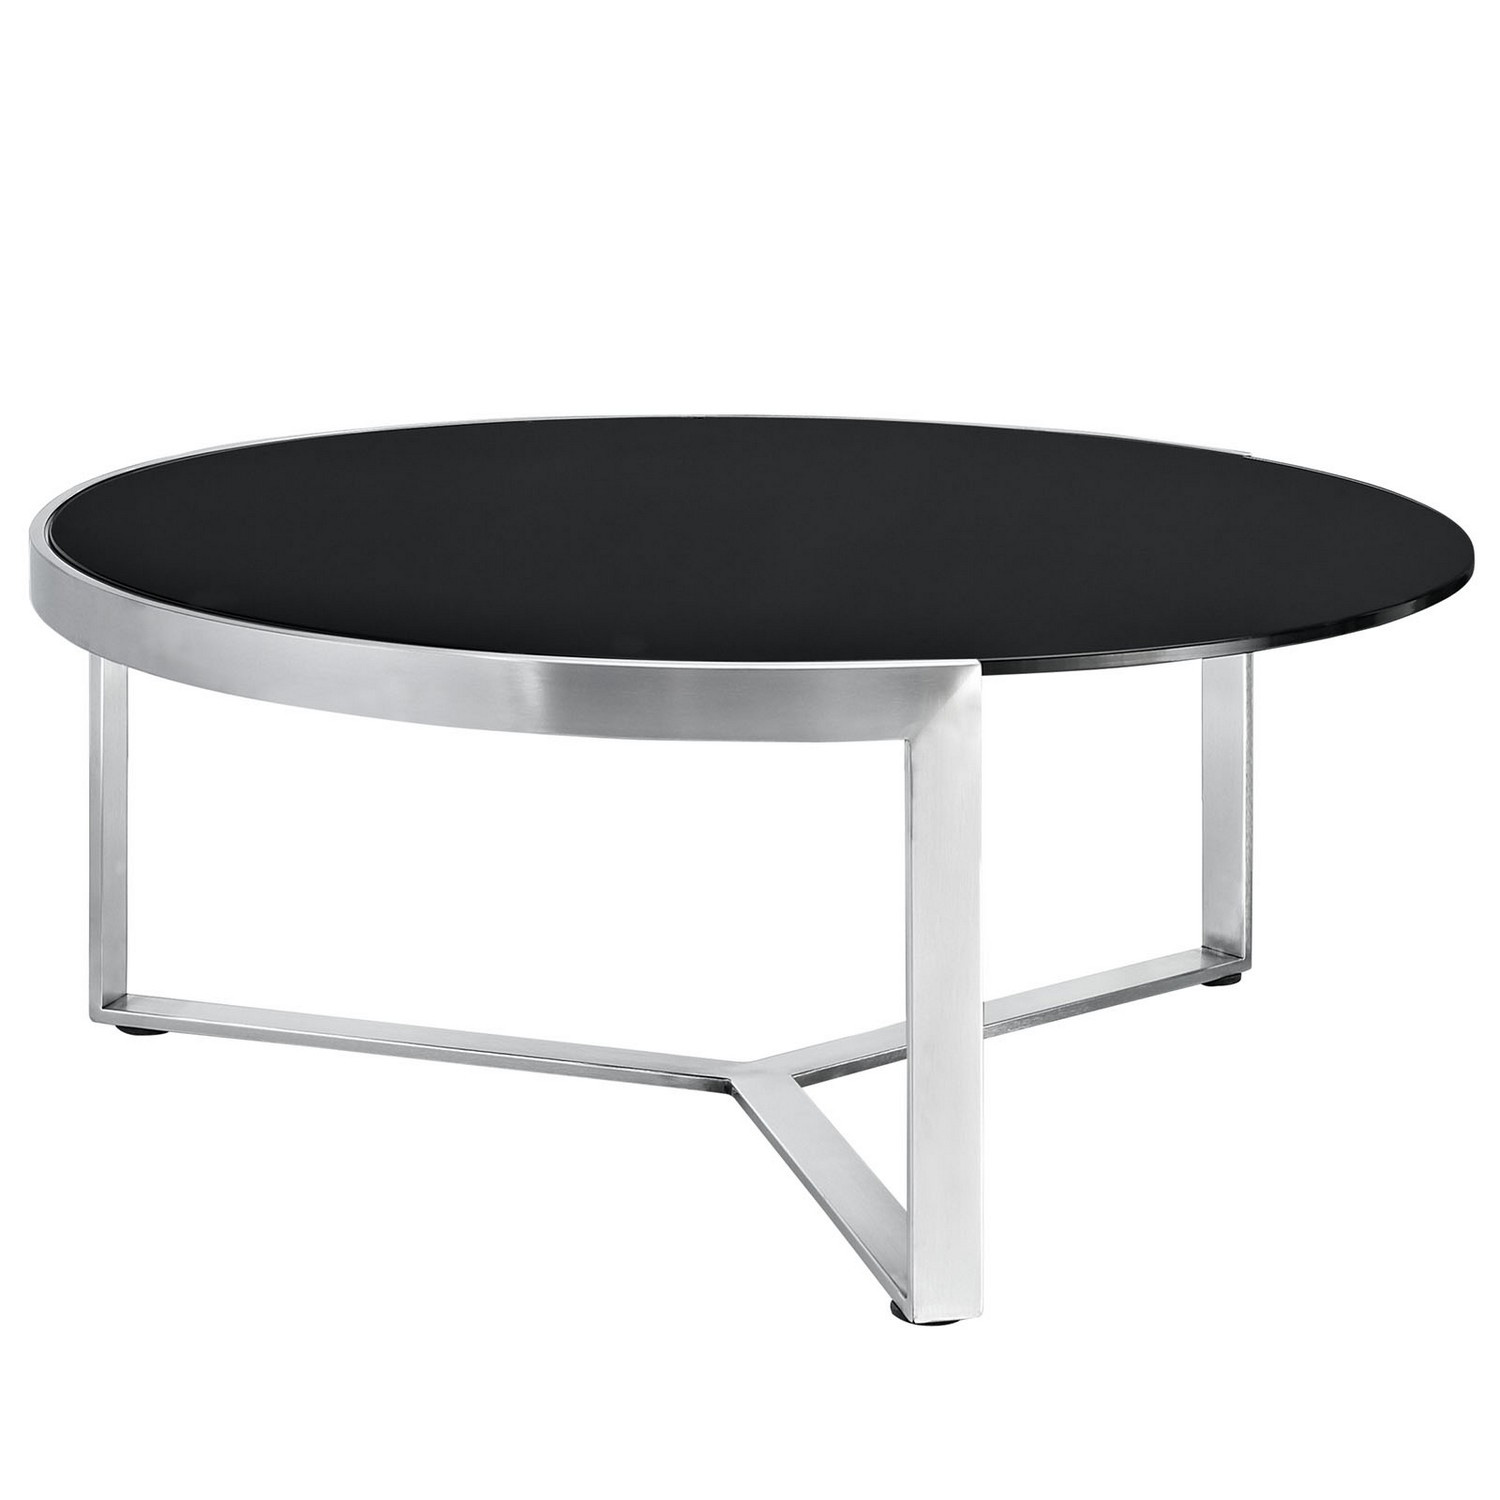 Modway Disk Coffee Table - Black